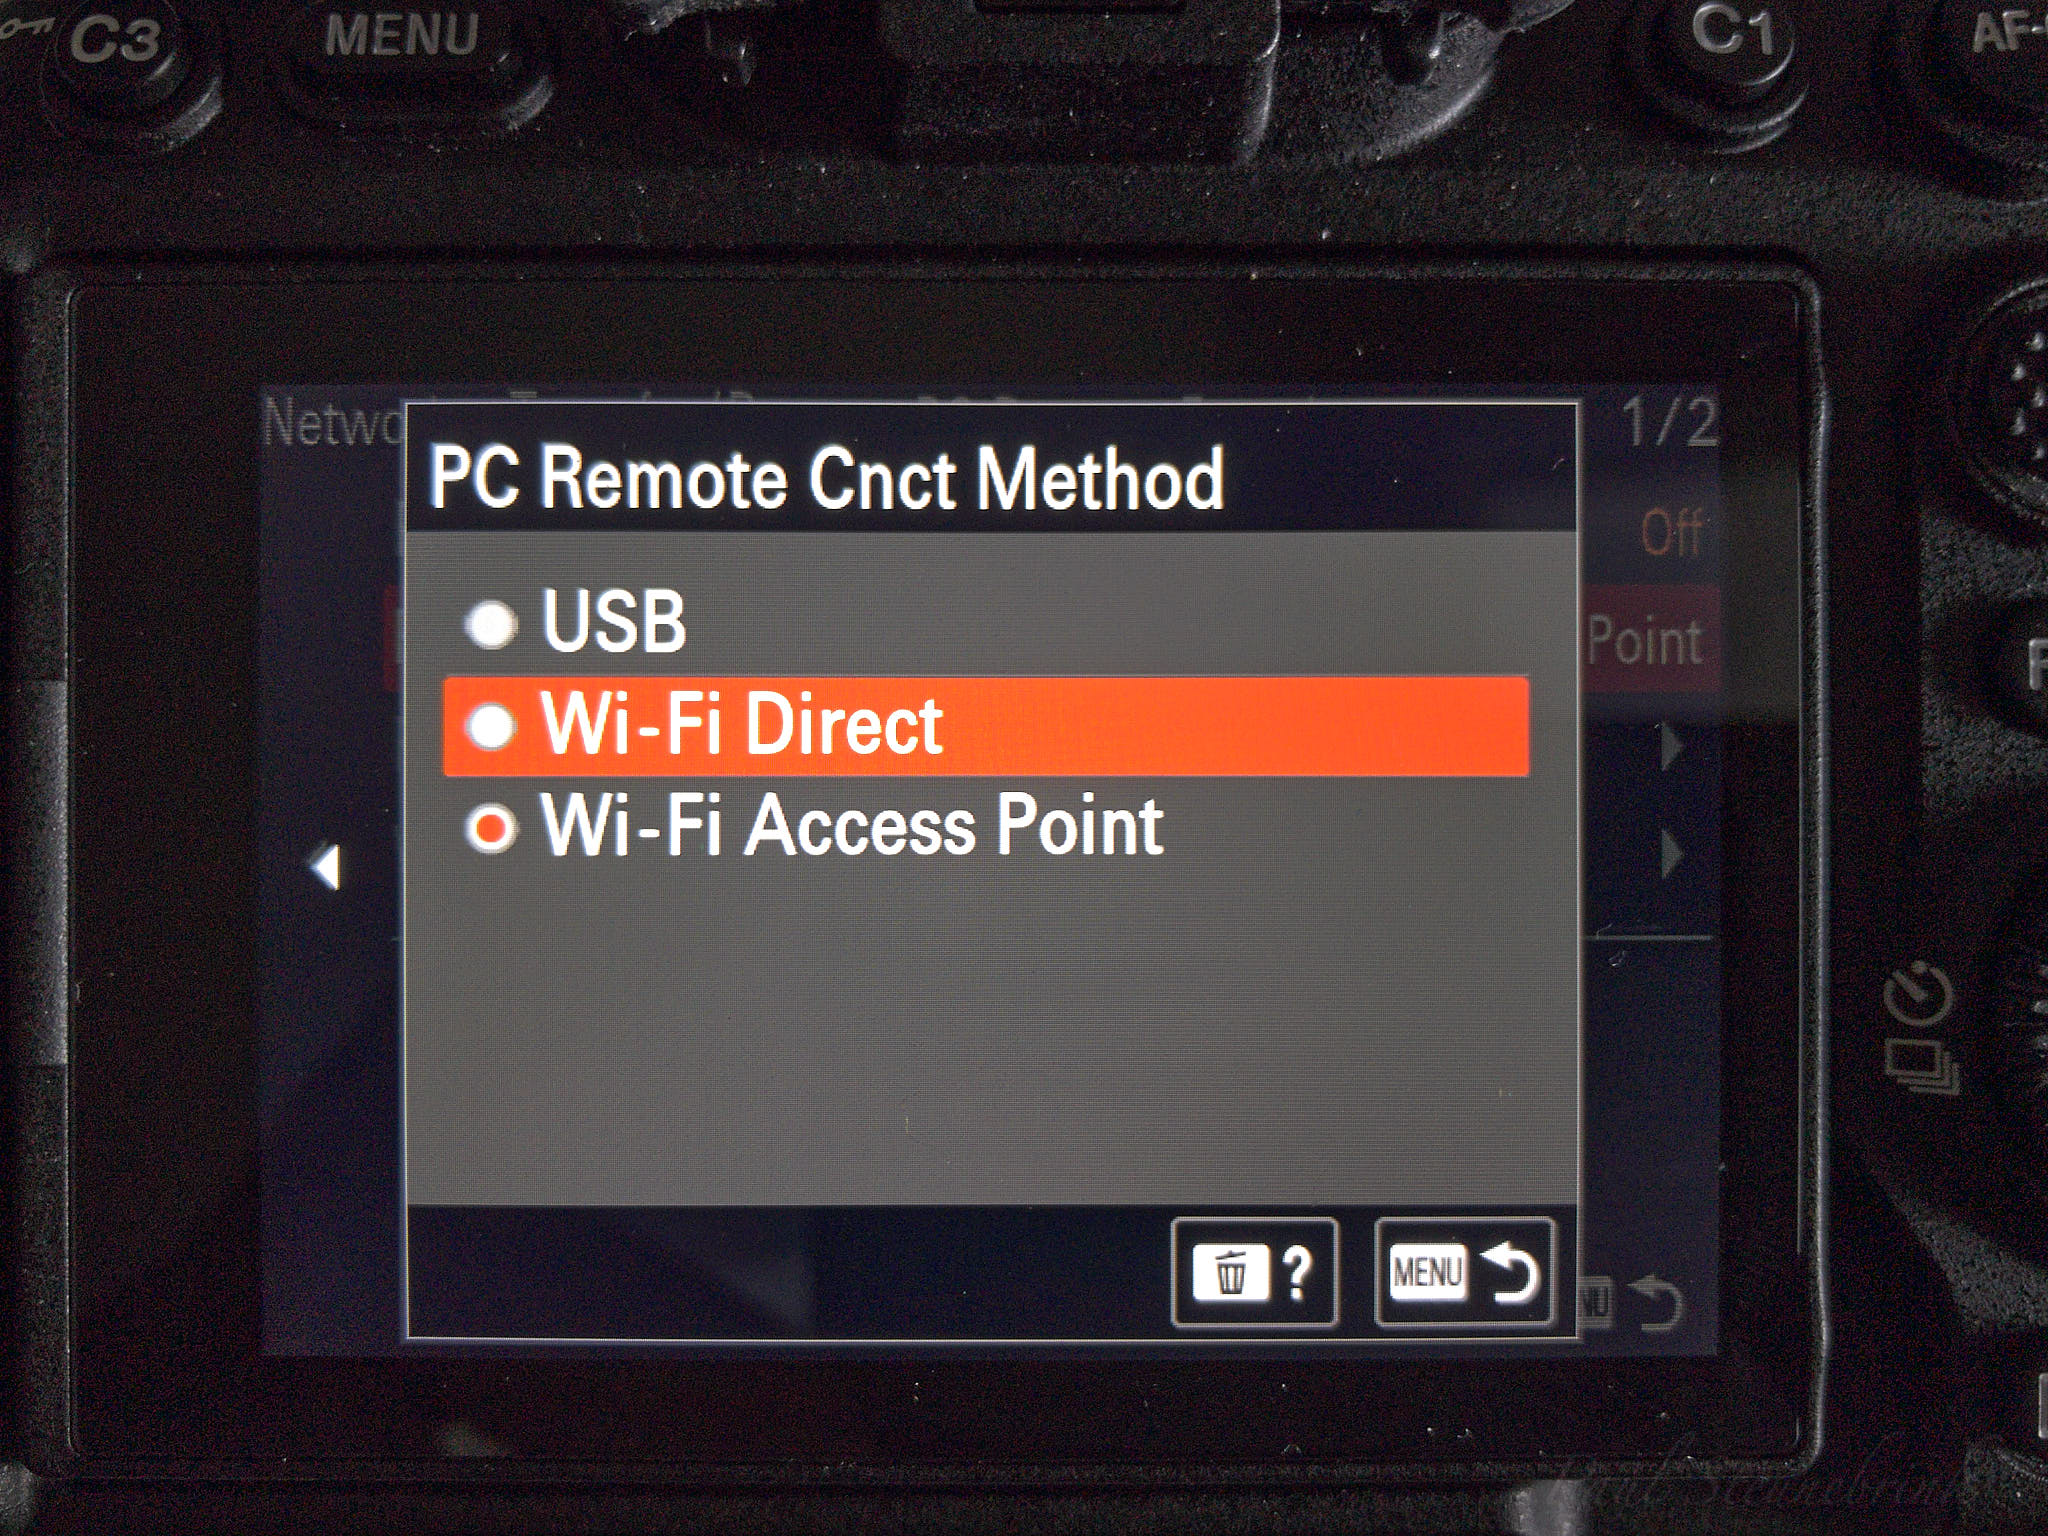 sony a7 iv, pc remote connection method, wireless